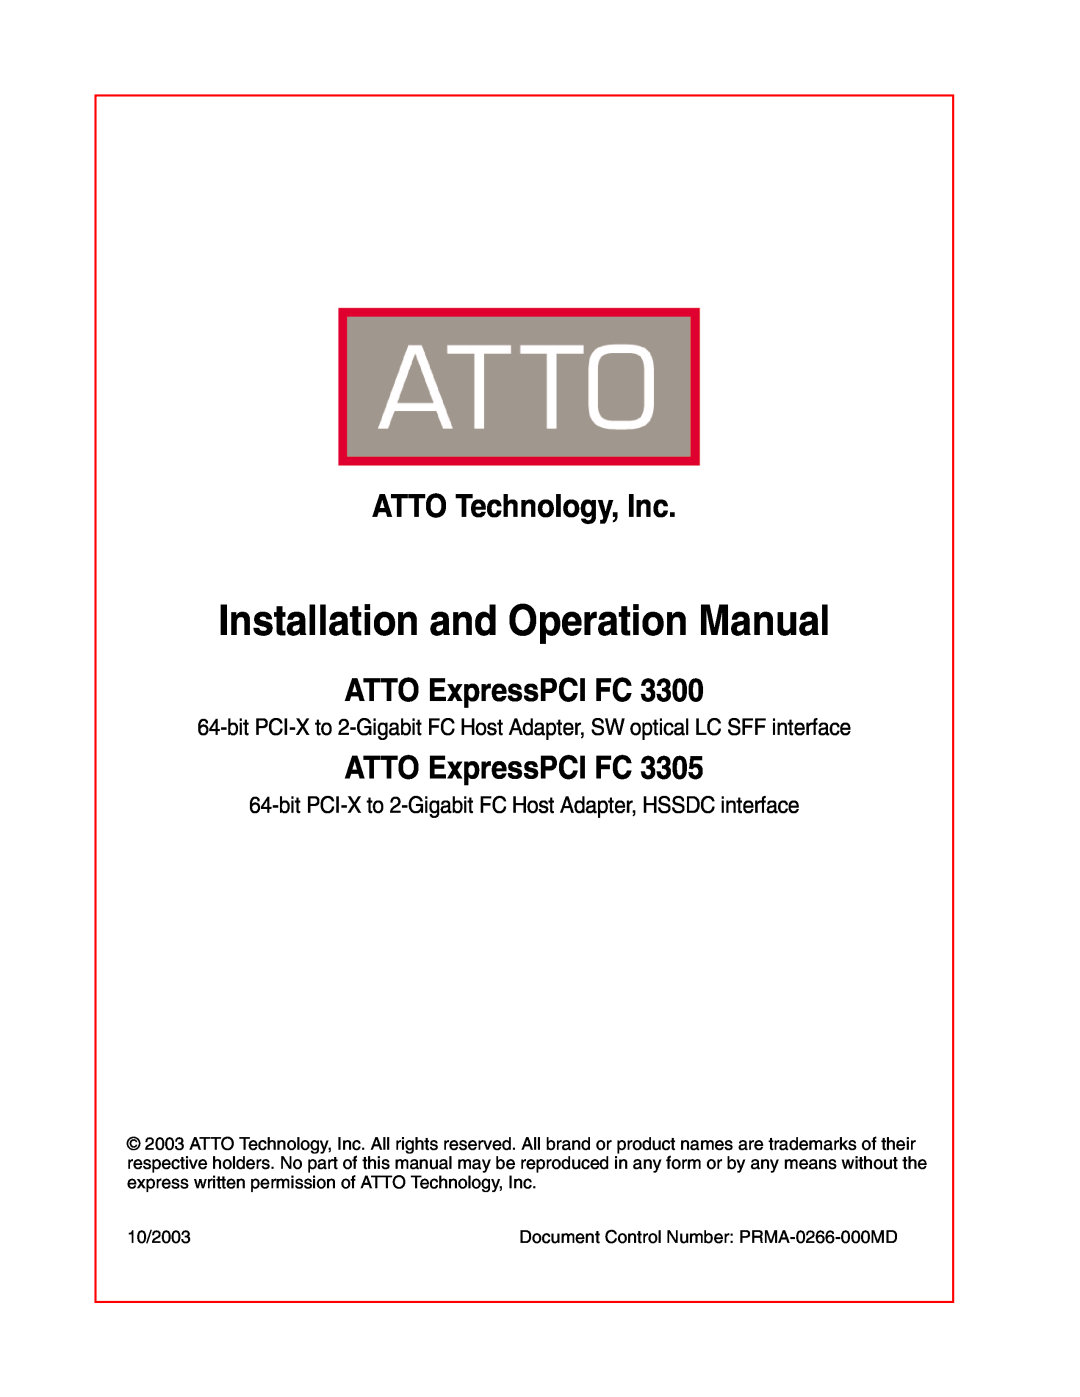 ATTO Technology FC 3305 operation manual ATTO Technology, Inc, ATTO ExpressPCI FC, Installation and Operation Manual 